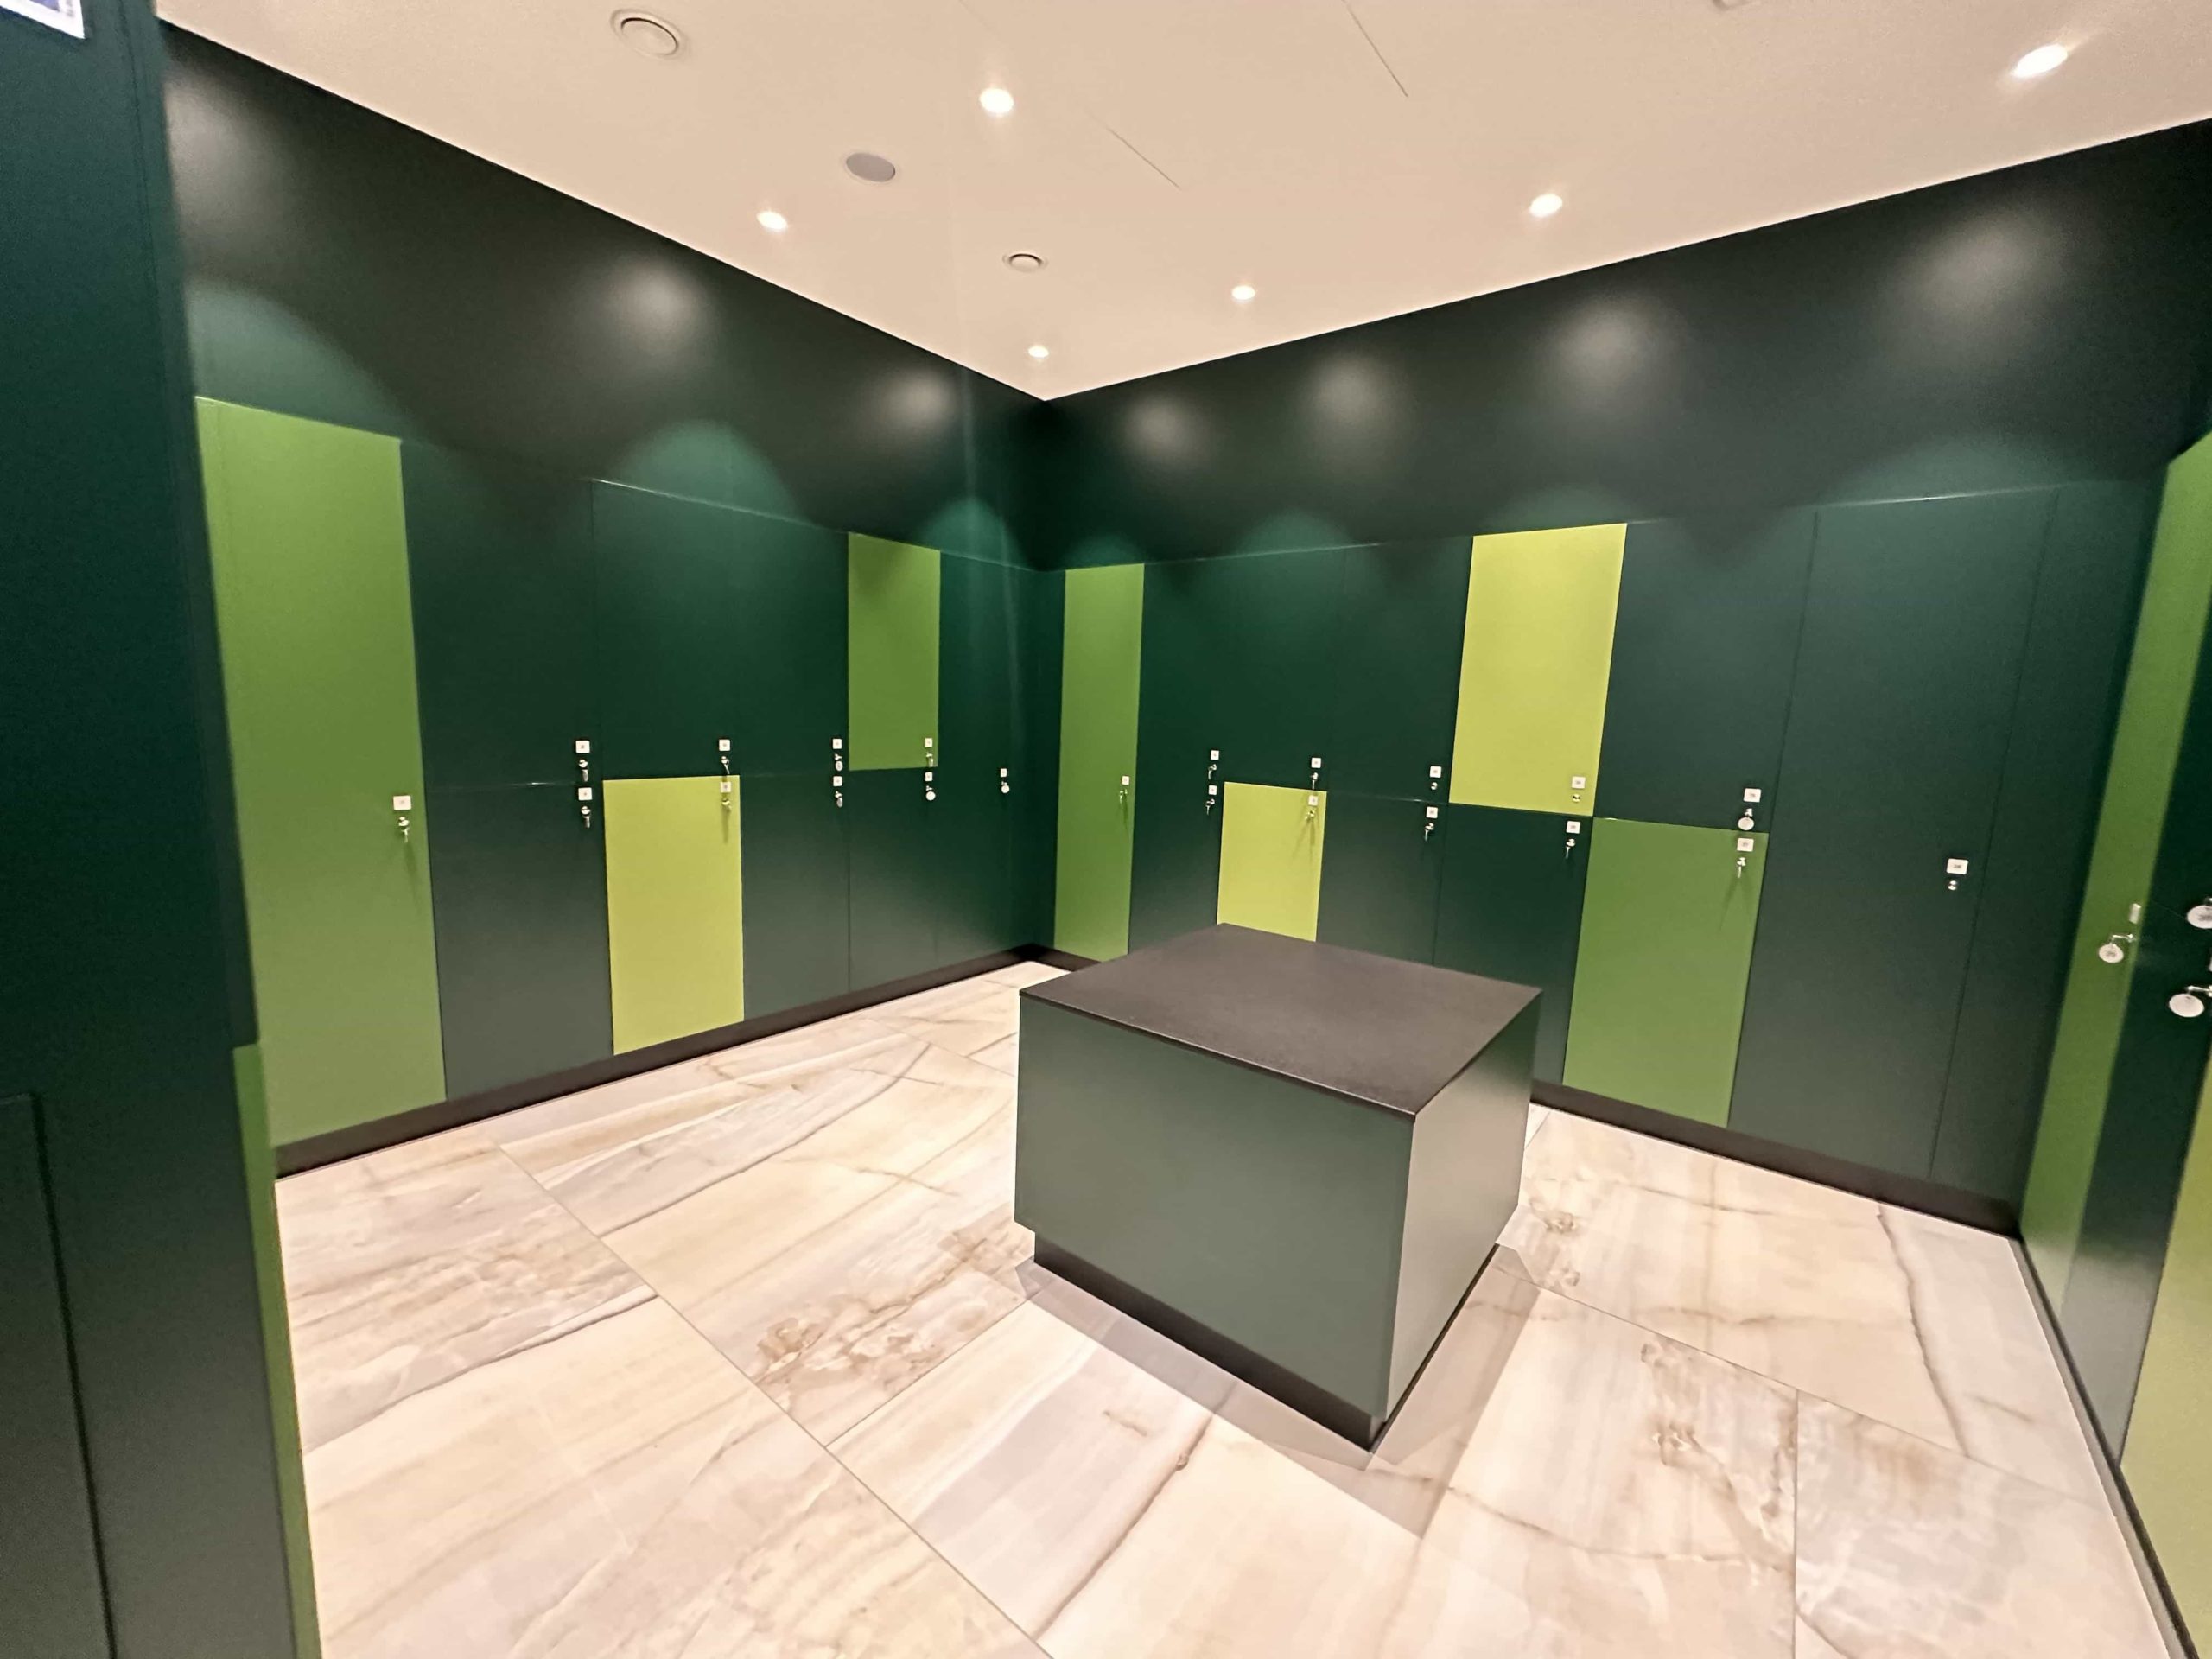 A square room of lockers, in various shades of green